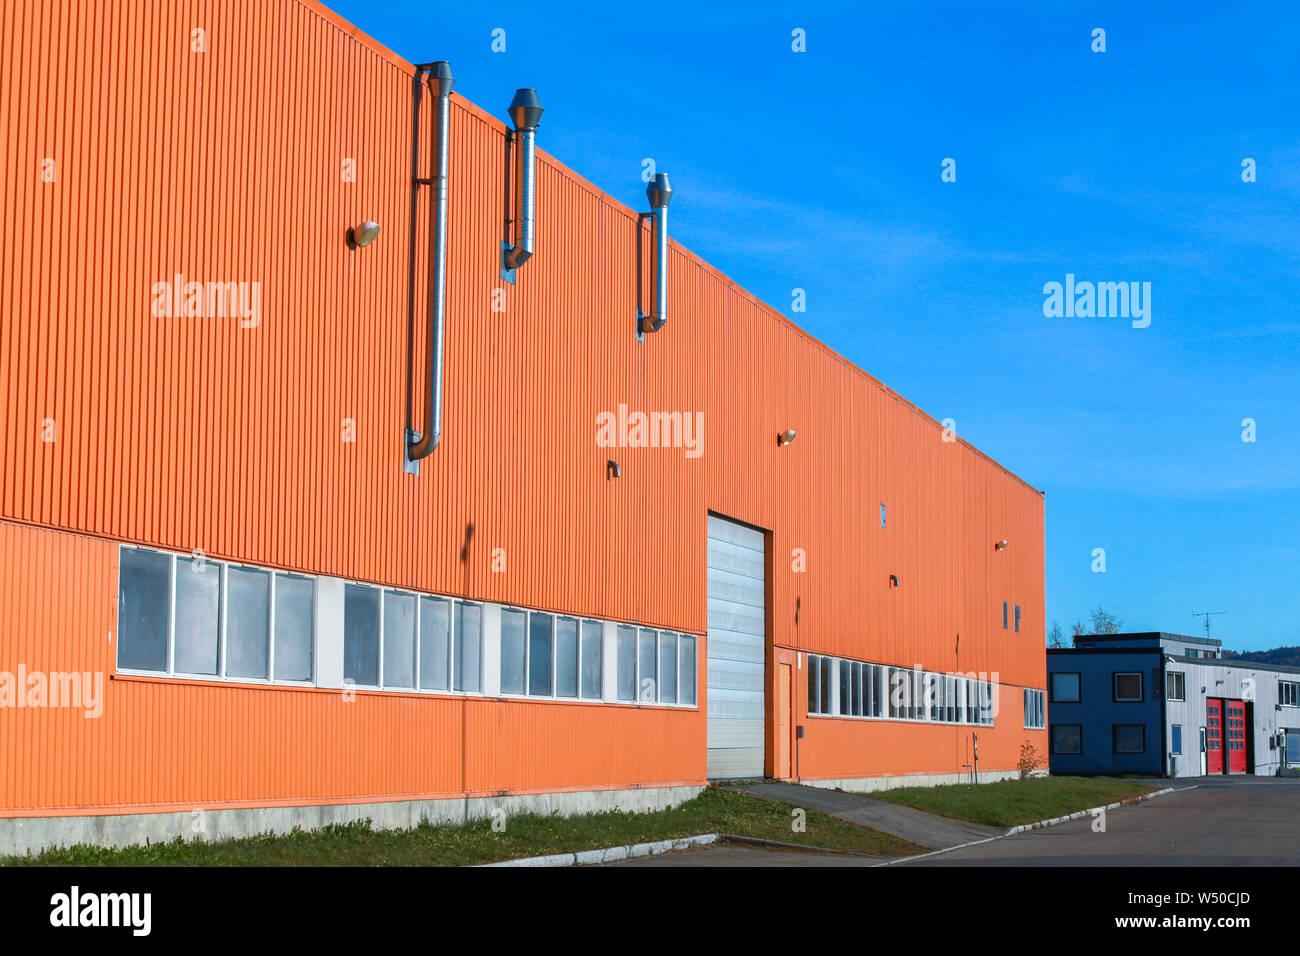 Facade of a storage building. Port of Levanger, Norway Stock Photo